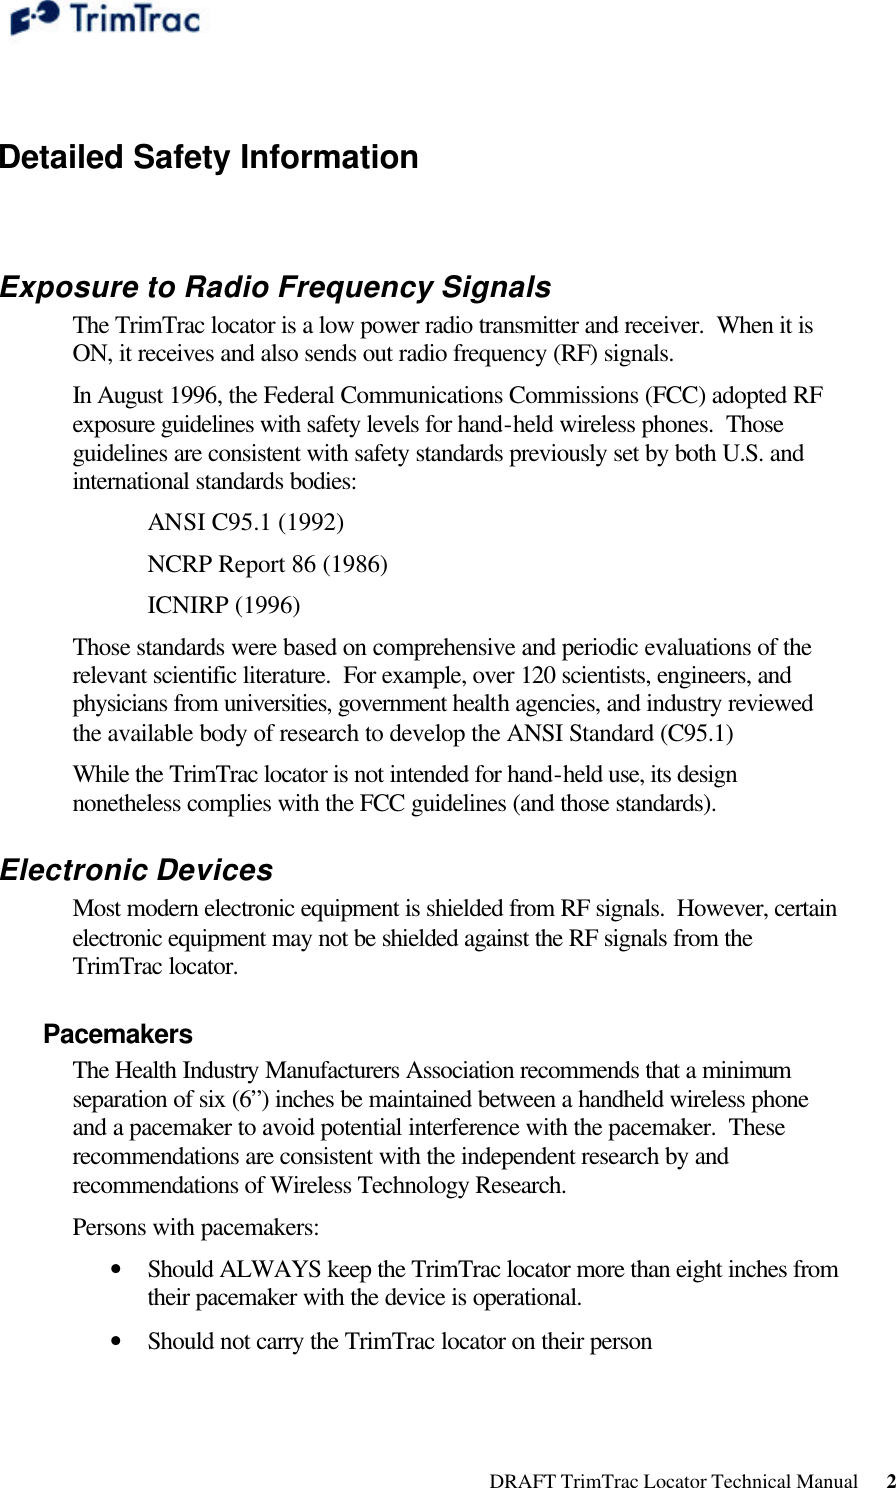  DRAFT TrimTrac Locator Technical Manual      2  Detailed Safety Information  Exposure to Radio Frequency Signals The TrimTrac locator is a low power radio transmitter and receiver.  When it is ON, it receives and also sends out radio frequency (RF) signals. In August 1996, the Federal Communications Commissions (FCC) adopted RF exposure guidelines with safety levels for hand-held wireless phones.  Those guidelines are consistent with safety standards previously set by both U.S. and international standards bodies: ANSI C95.1 (1992) NCRP Report 86 (1986) ICNIRP (1996) Those standards were based on comprehensive and periodic evaluations of the relevant scientific literature.  For example, over 120 scientists, engineers, and physicians from universities, government health agencies, and industry reviewed the available body of research to develop the ANSI Standard (C95.1) While the TrimTrac locator is not intended for hand-held use, its design nonetheless complies with the FCC guidelines (and those standards). Electronic Devices Most modern electronic equipment is shielded from RF signals.  However, certain electronic equipment may not be shielded against the RF signals from the TrimTrac locator. Pacemakers The Health Industry Manufacturers Association recommends that a minimum separation of six (6”) inches be maintained between a handheld wireless phone and a pacemaker to avoid potential interference with the pacemaker.  These recommendations are consistent with the independent research by and recommendations of Wireless Technology Research.   Persons with pacemakers: • Should ALWAYS keep the TrimTrac locator more than eight inches from their pacemaker with the device is operational. • Should not carry the TrimTrac locator on their person 